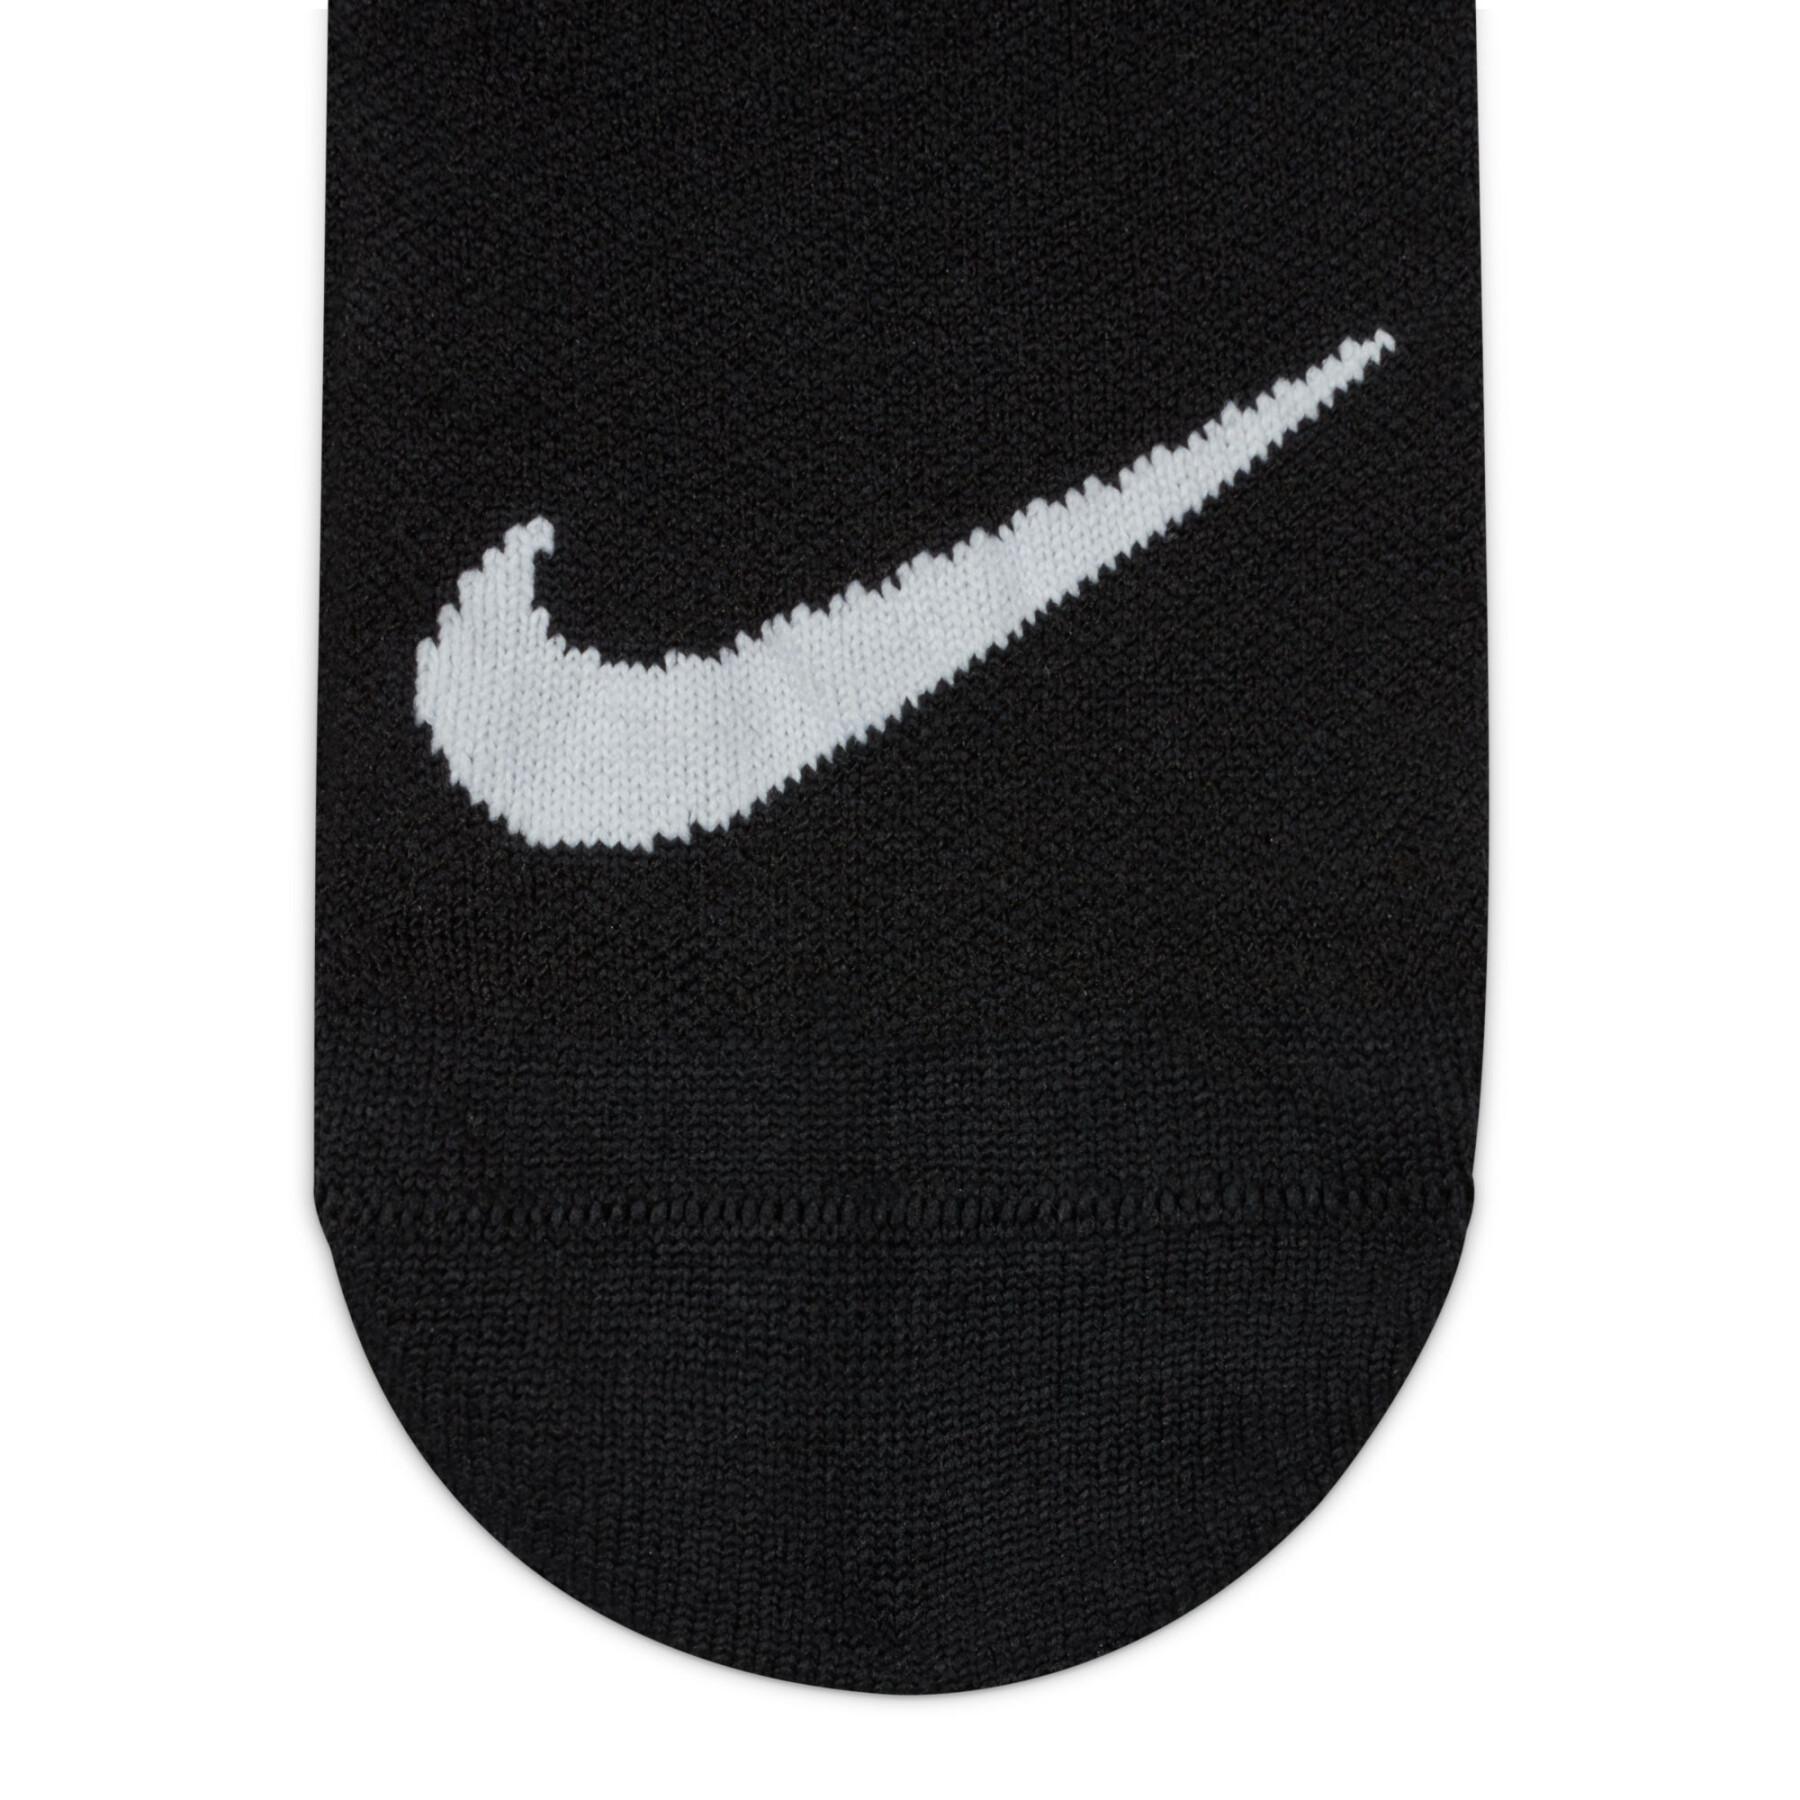 Chaussettes femme Nike Everyday Plus Lightweight